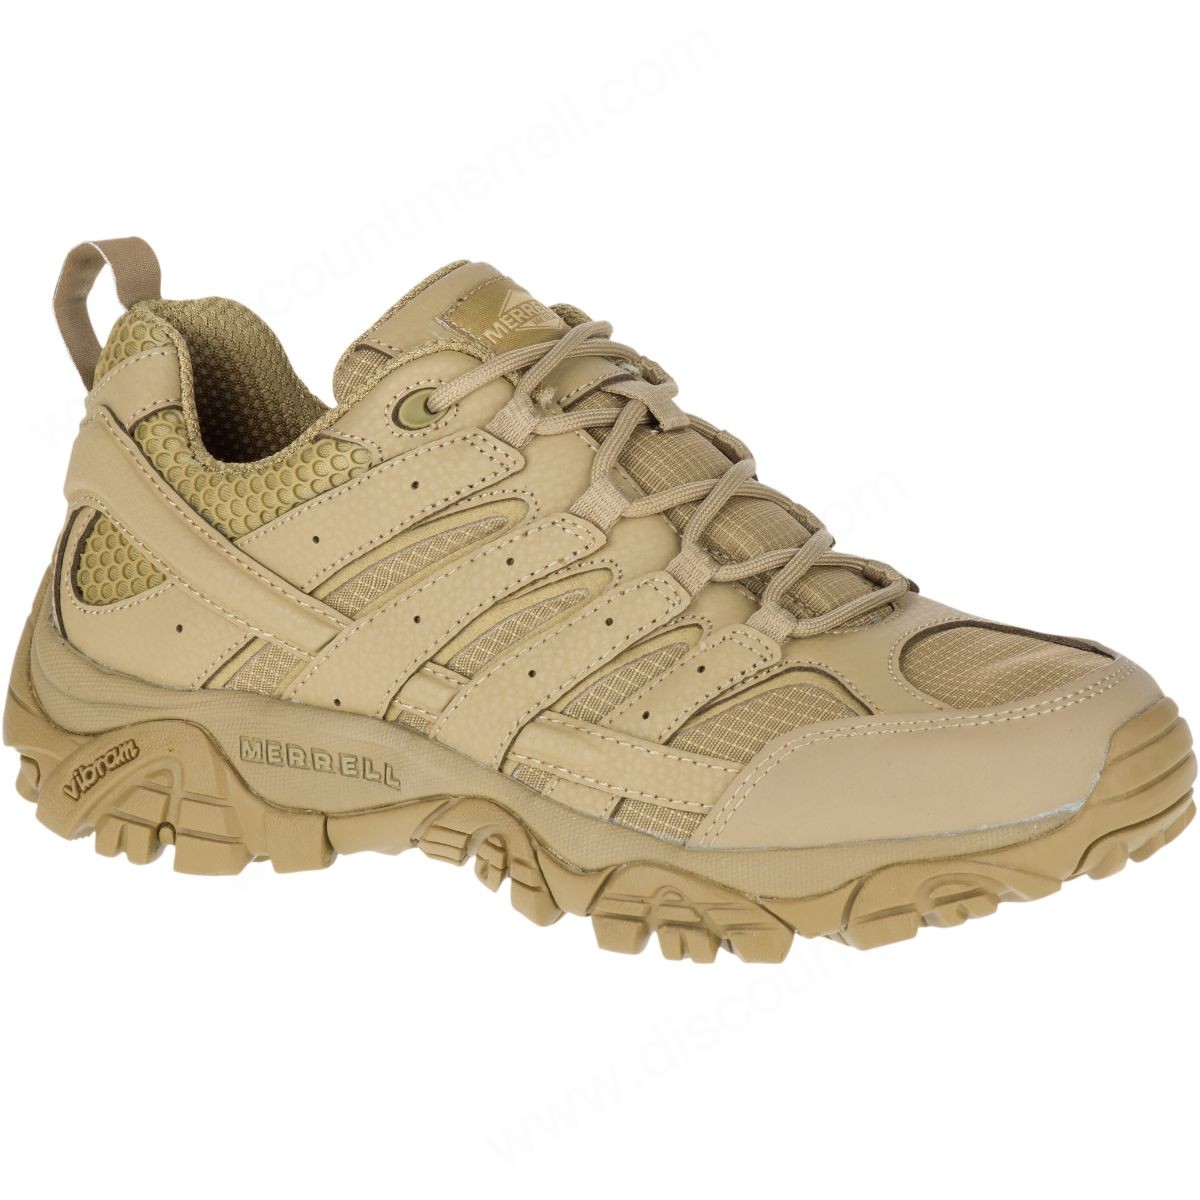 Merrell Woman's Moab Tactical Sneaker Coyote - Merrell Woman's Moab Tactical Sneaker Coyote